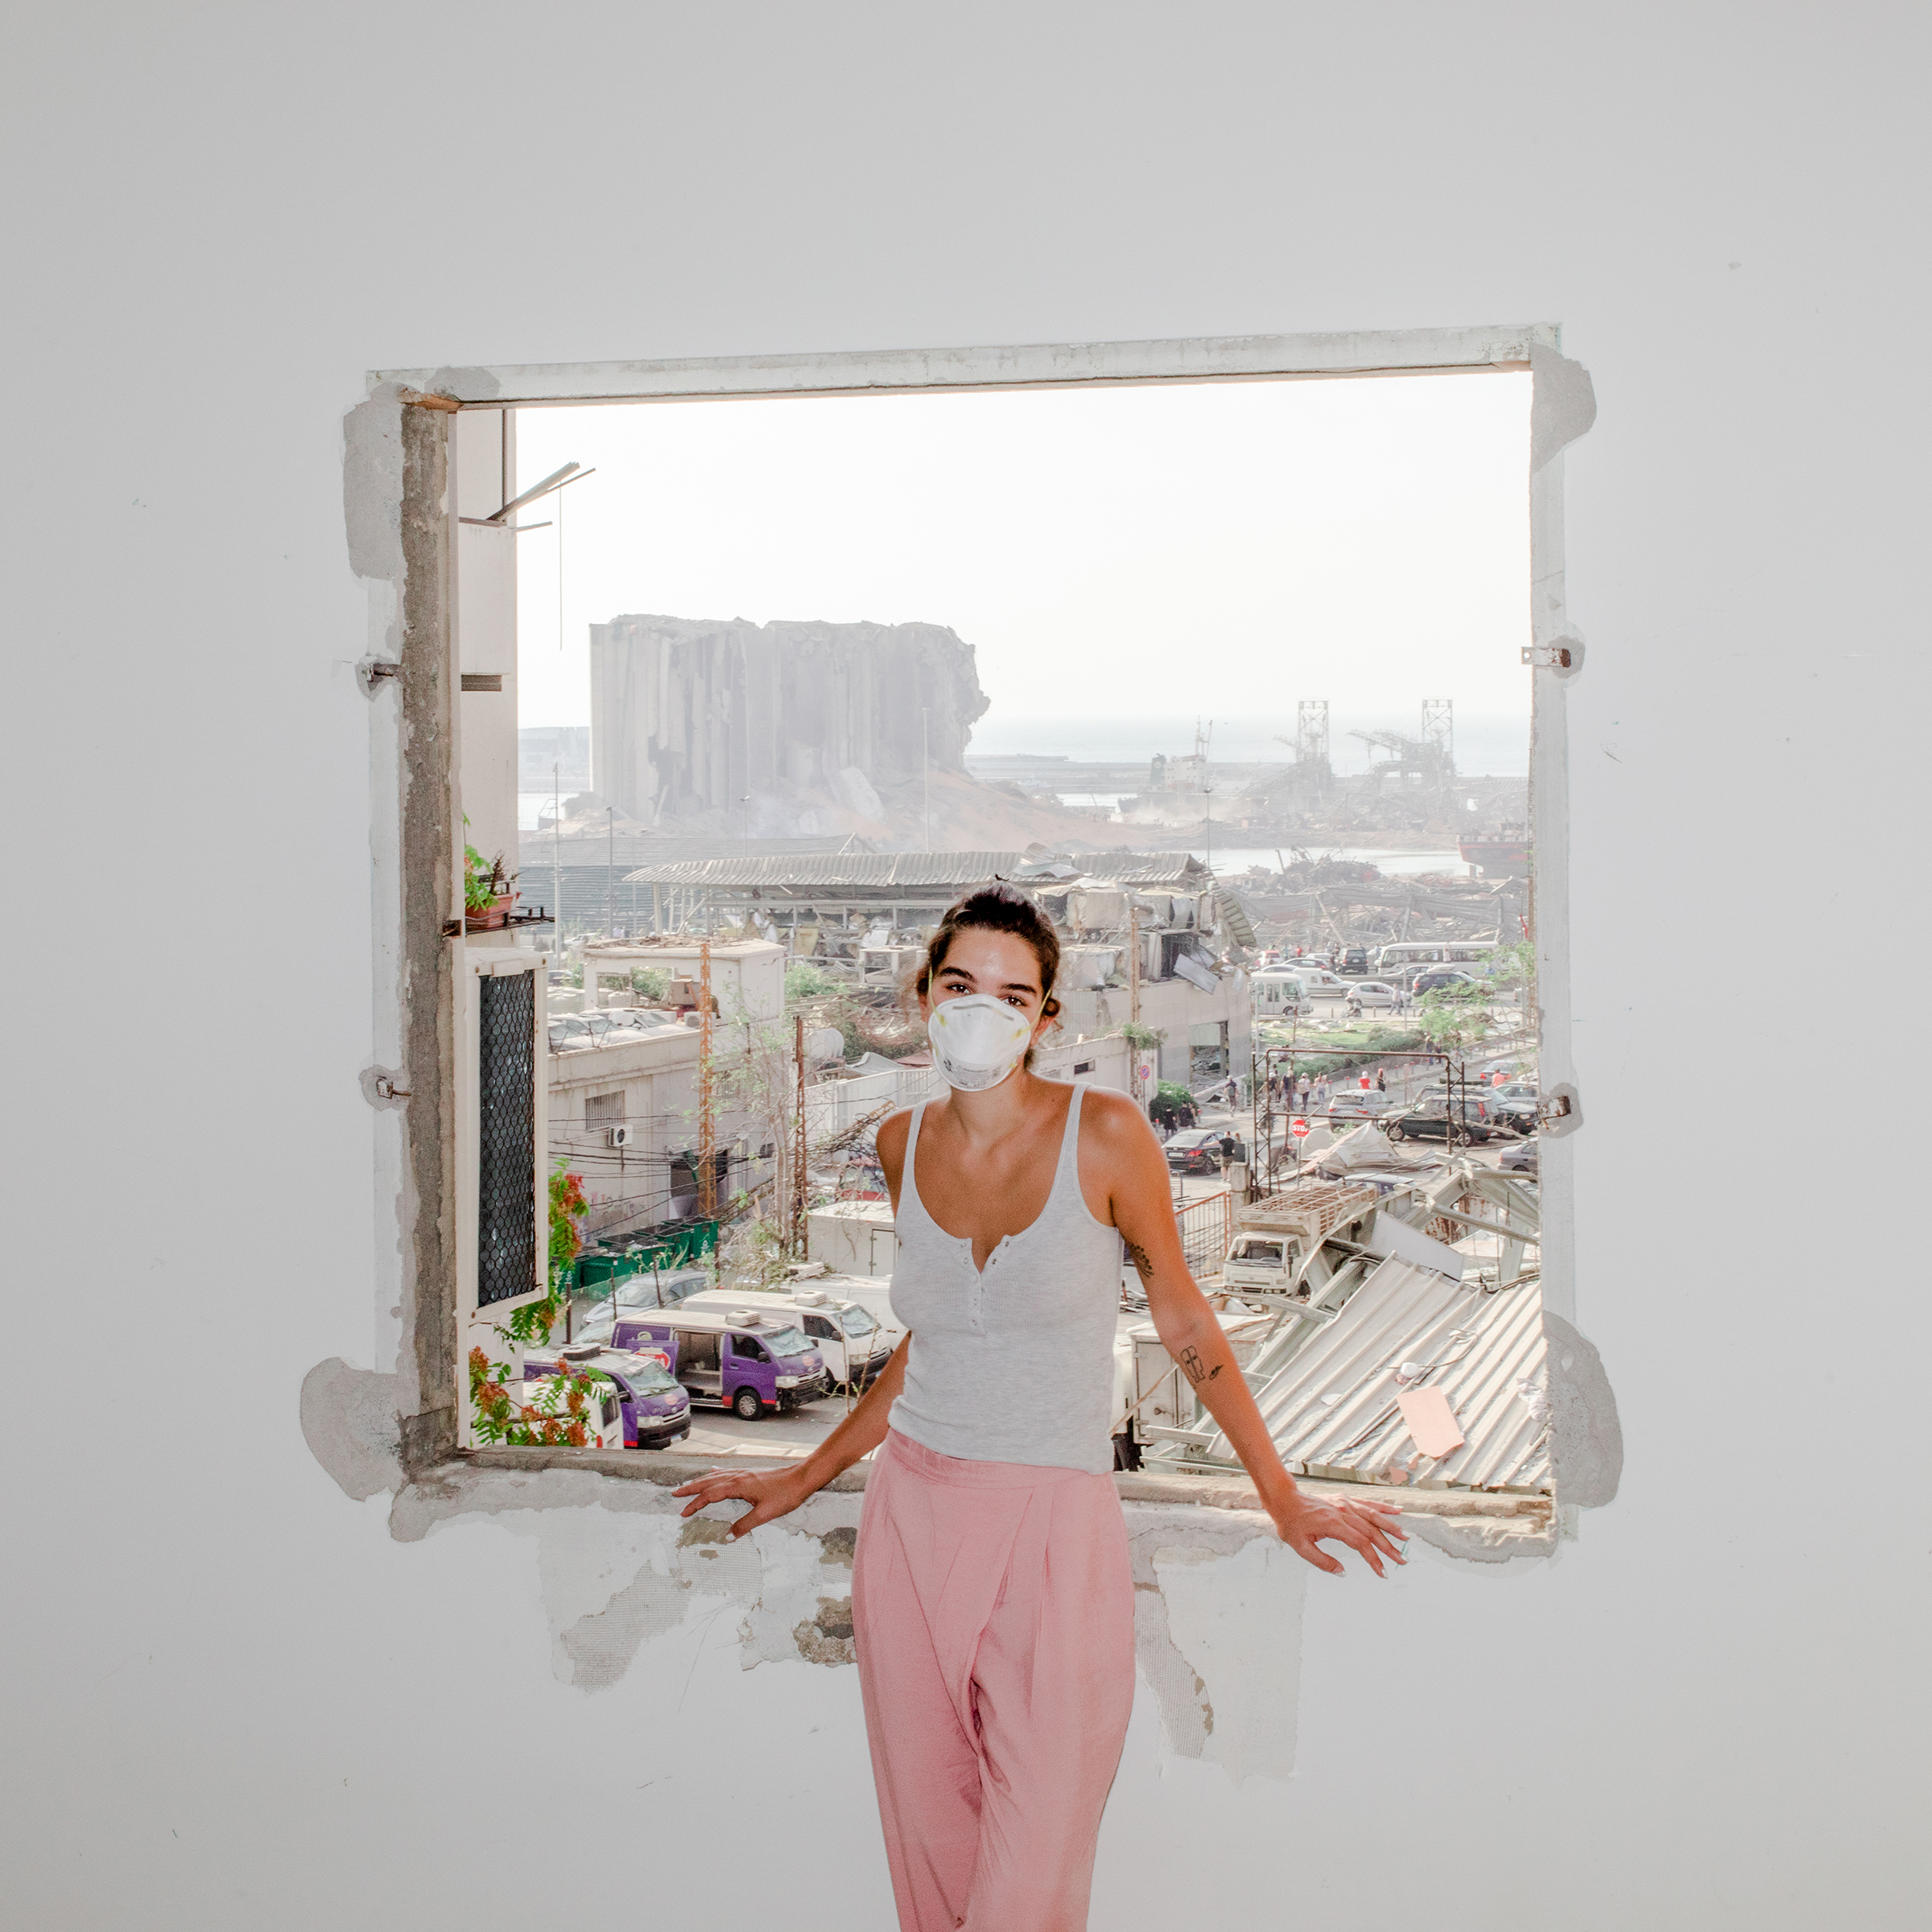 Nour Saliba stands in her apartment in the Mar Mikhael area of Beirut on Aug. 6, two days after the deadly explosion at the city’s port, seen through her blown-out window. “Honestly, I had it easy. I only lost my home. I am one of the lucky ones who still have their family and friends by their side,” says the 27-year-old community manager and model. “Trauma is written all over the fumes of this explosion. Yes, we are all traumatized, but we are also burnt out."Myriam Boulos for TIME